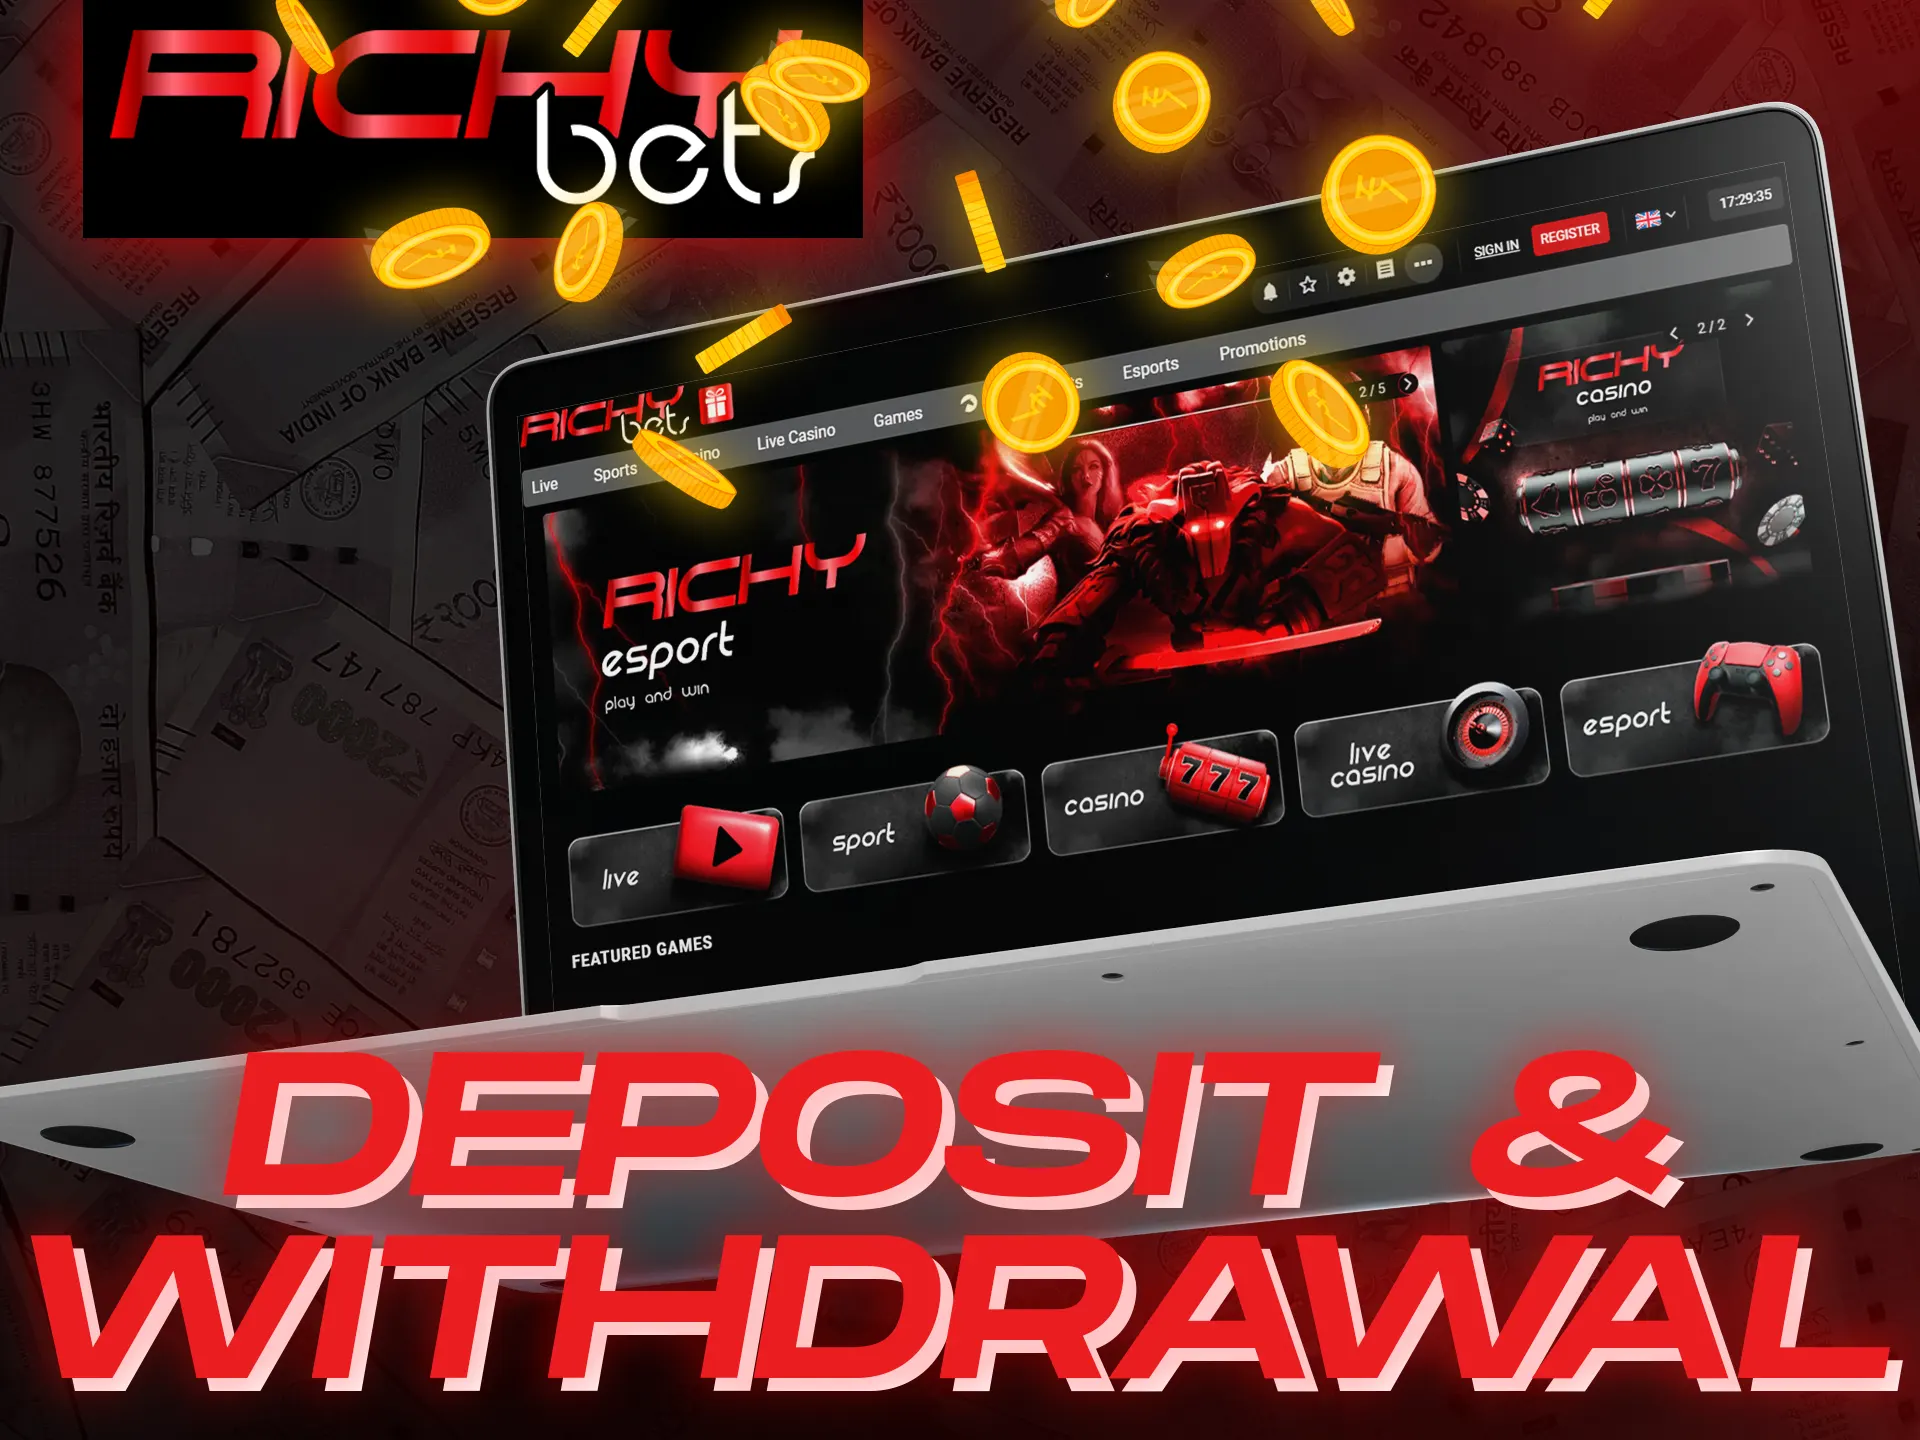 Deposit and withdraw money at the Richybets without any problems.